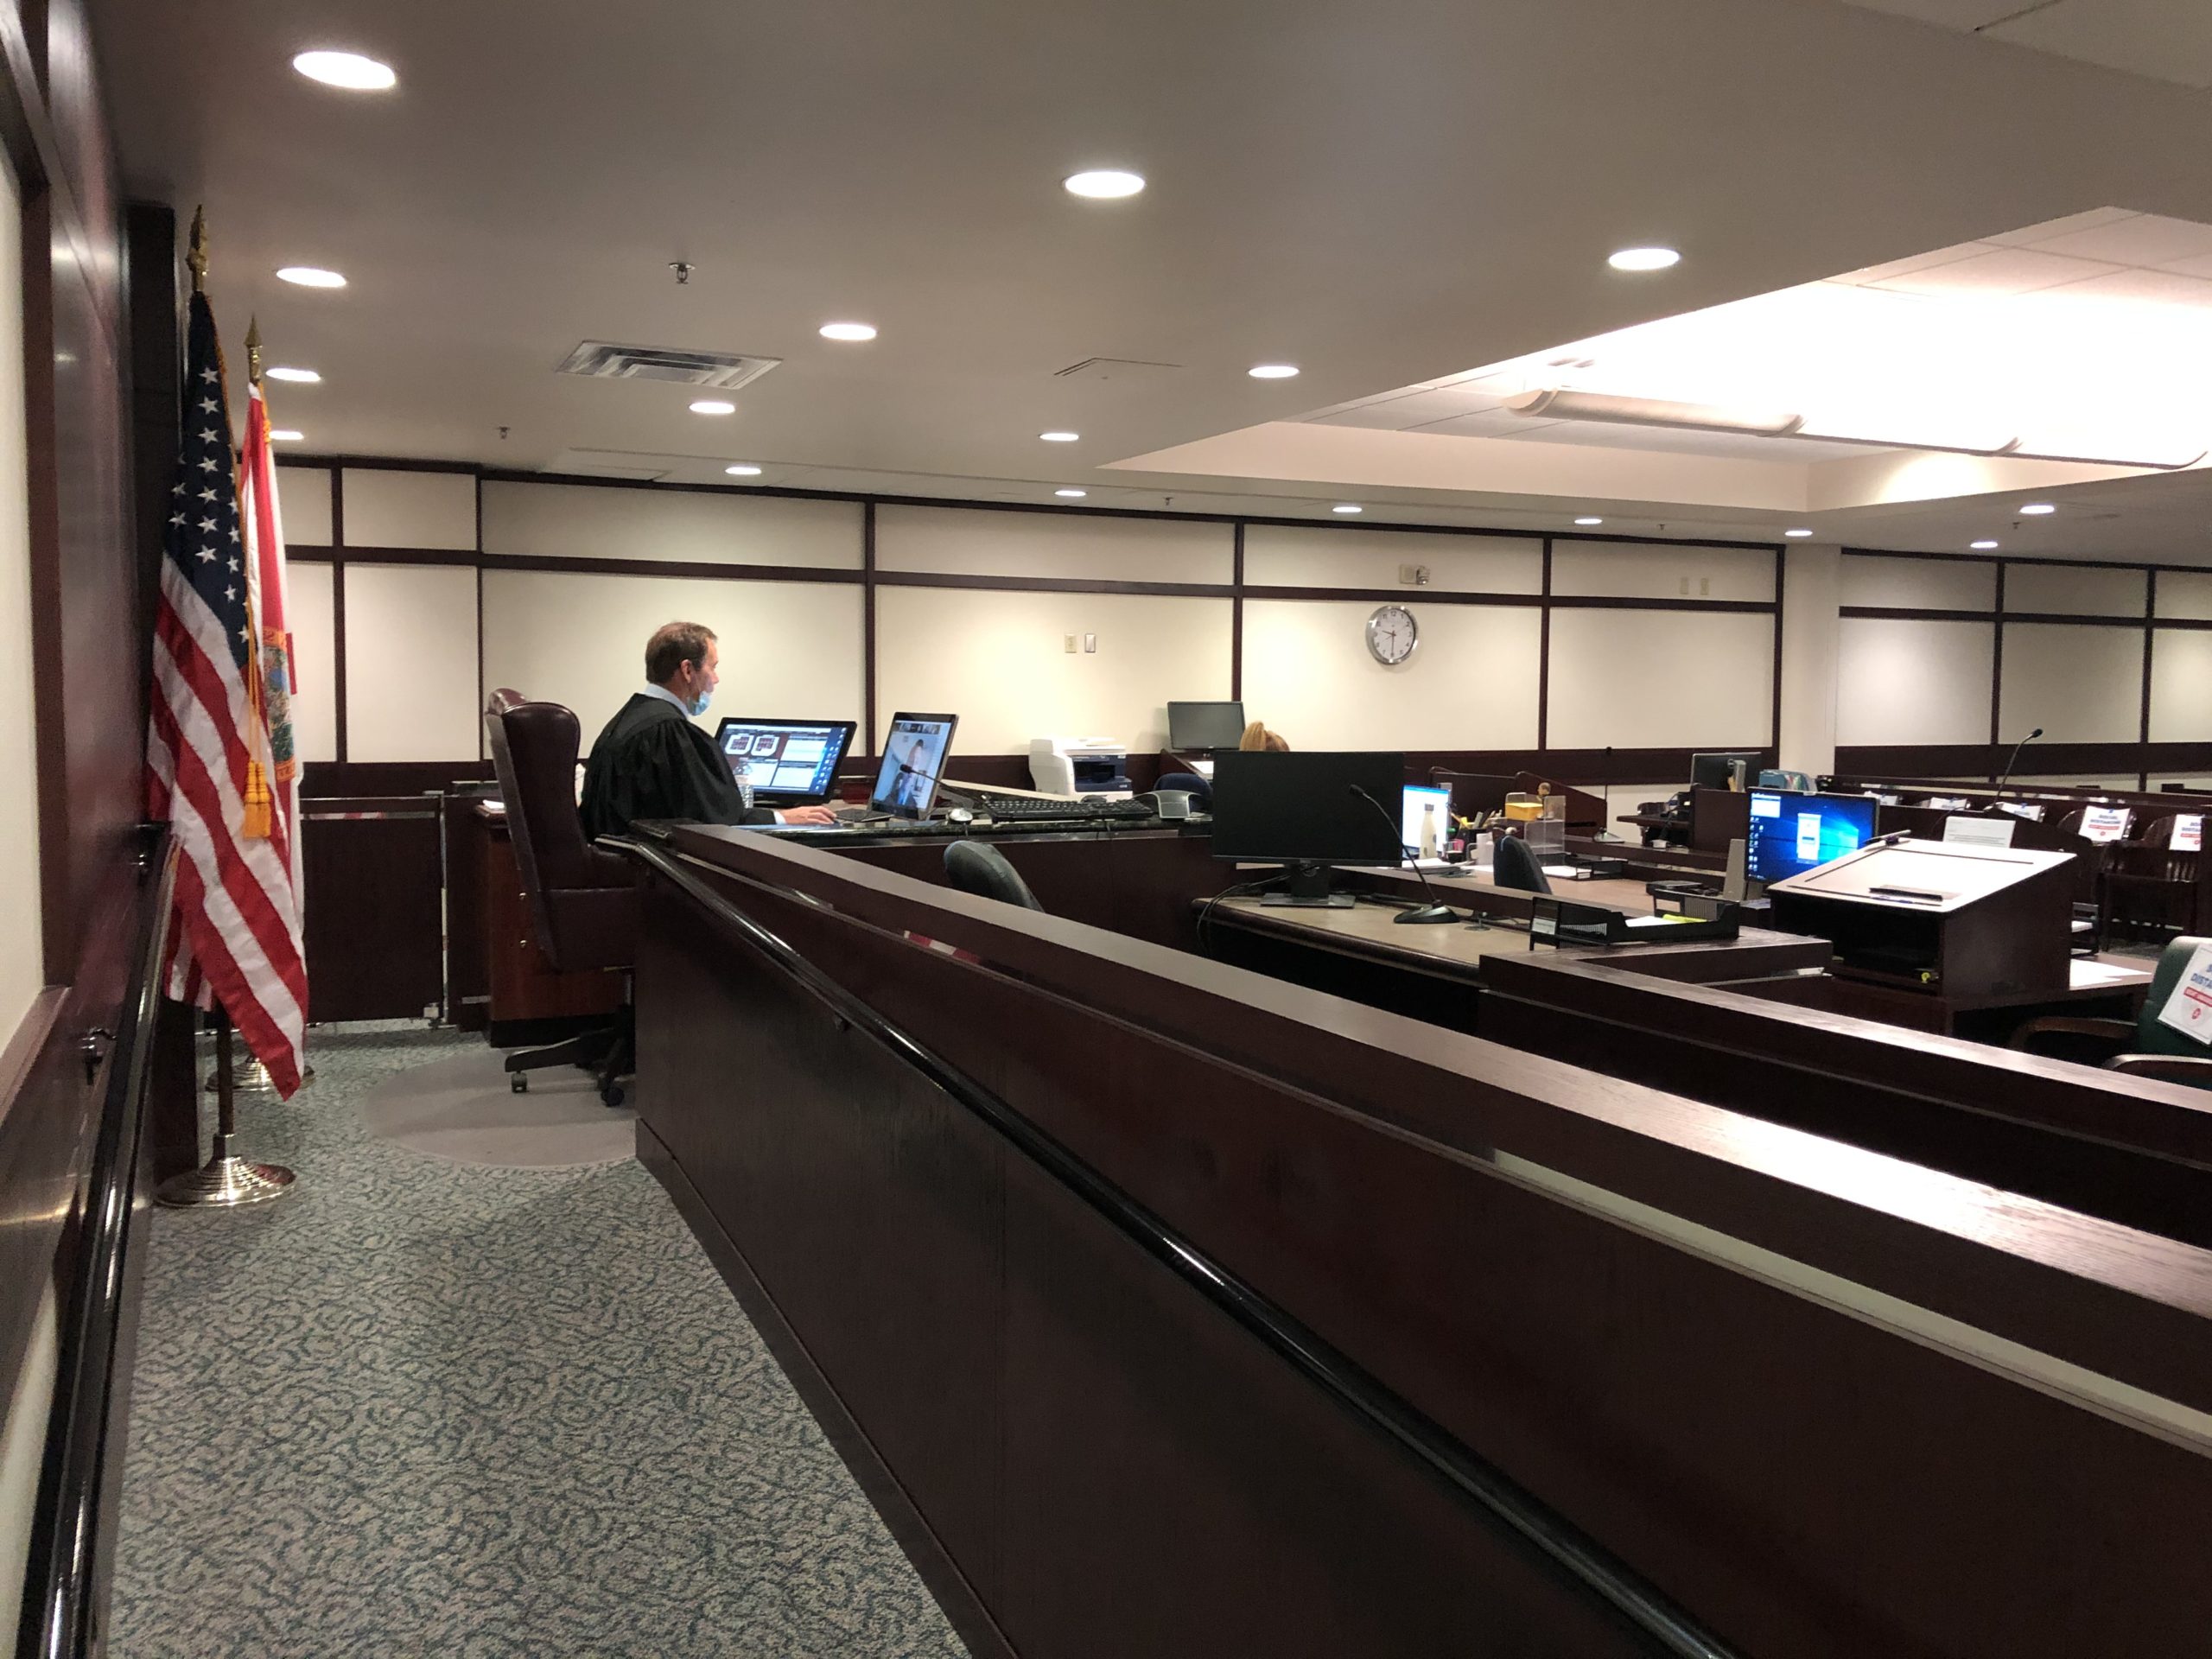 Judge presiding over an empty courtroom